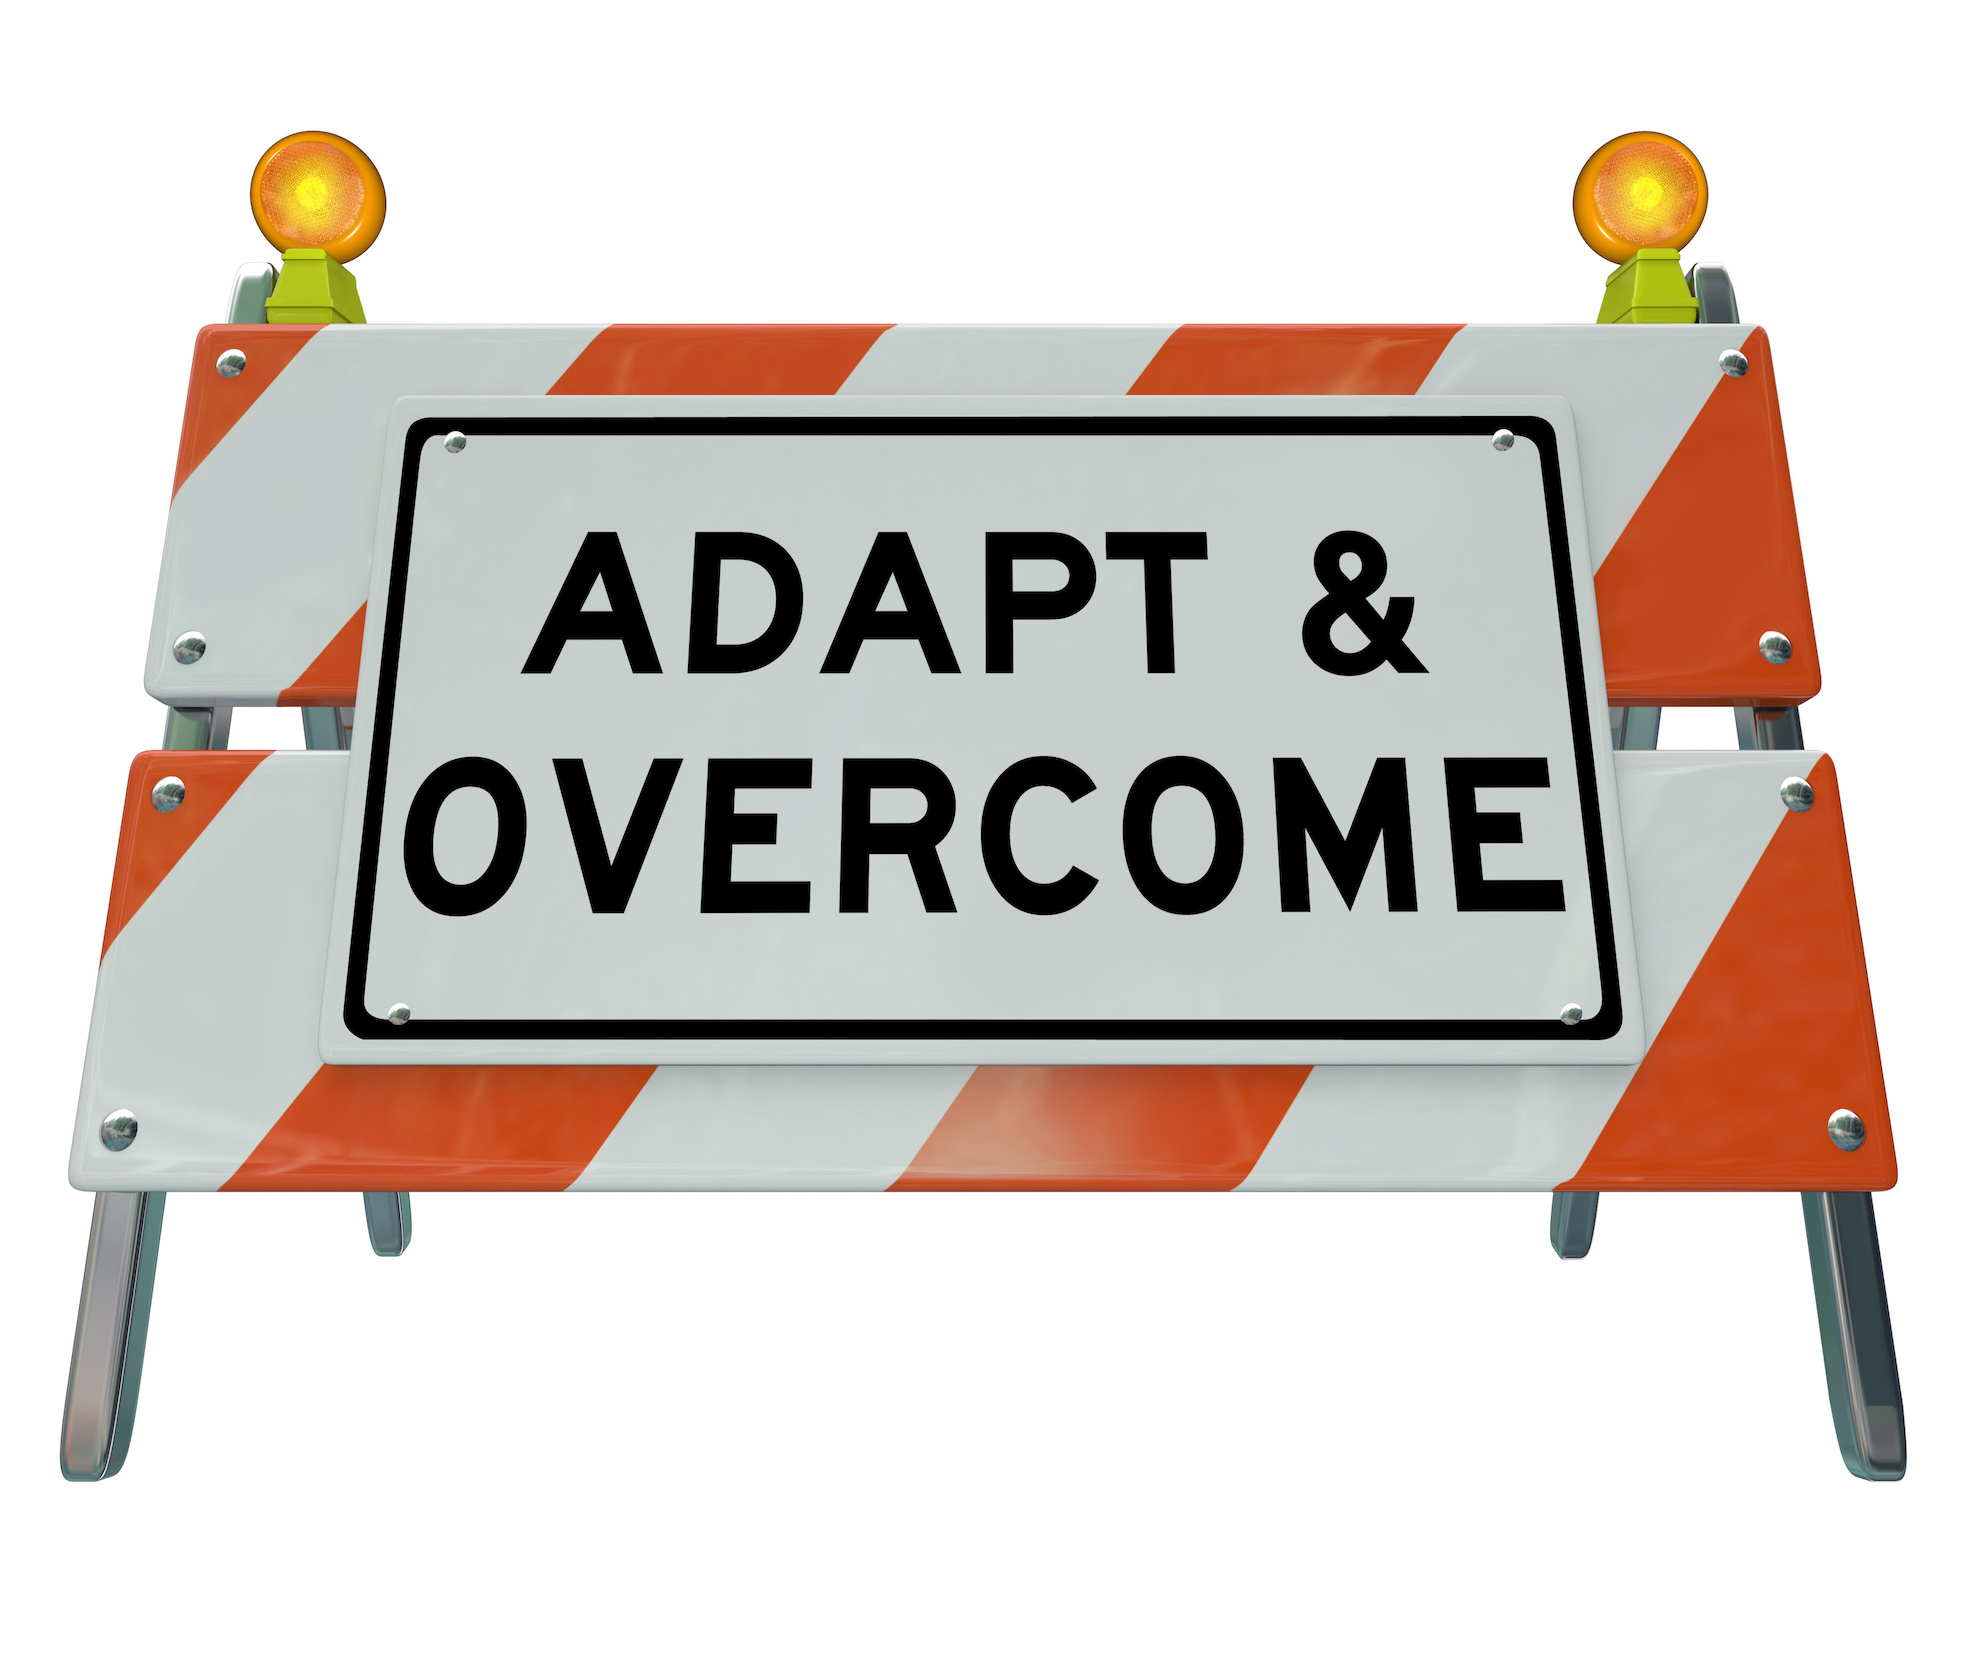 training blog - can you adapt and overcome?